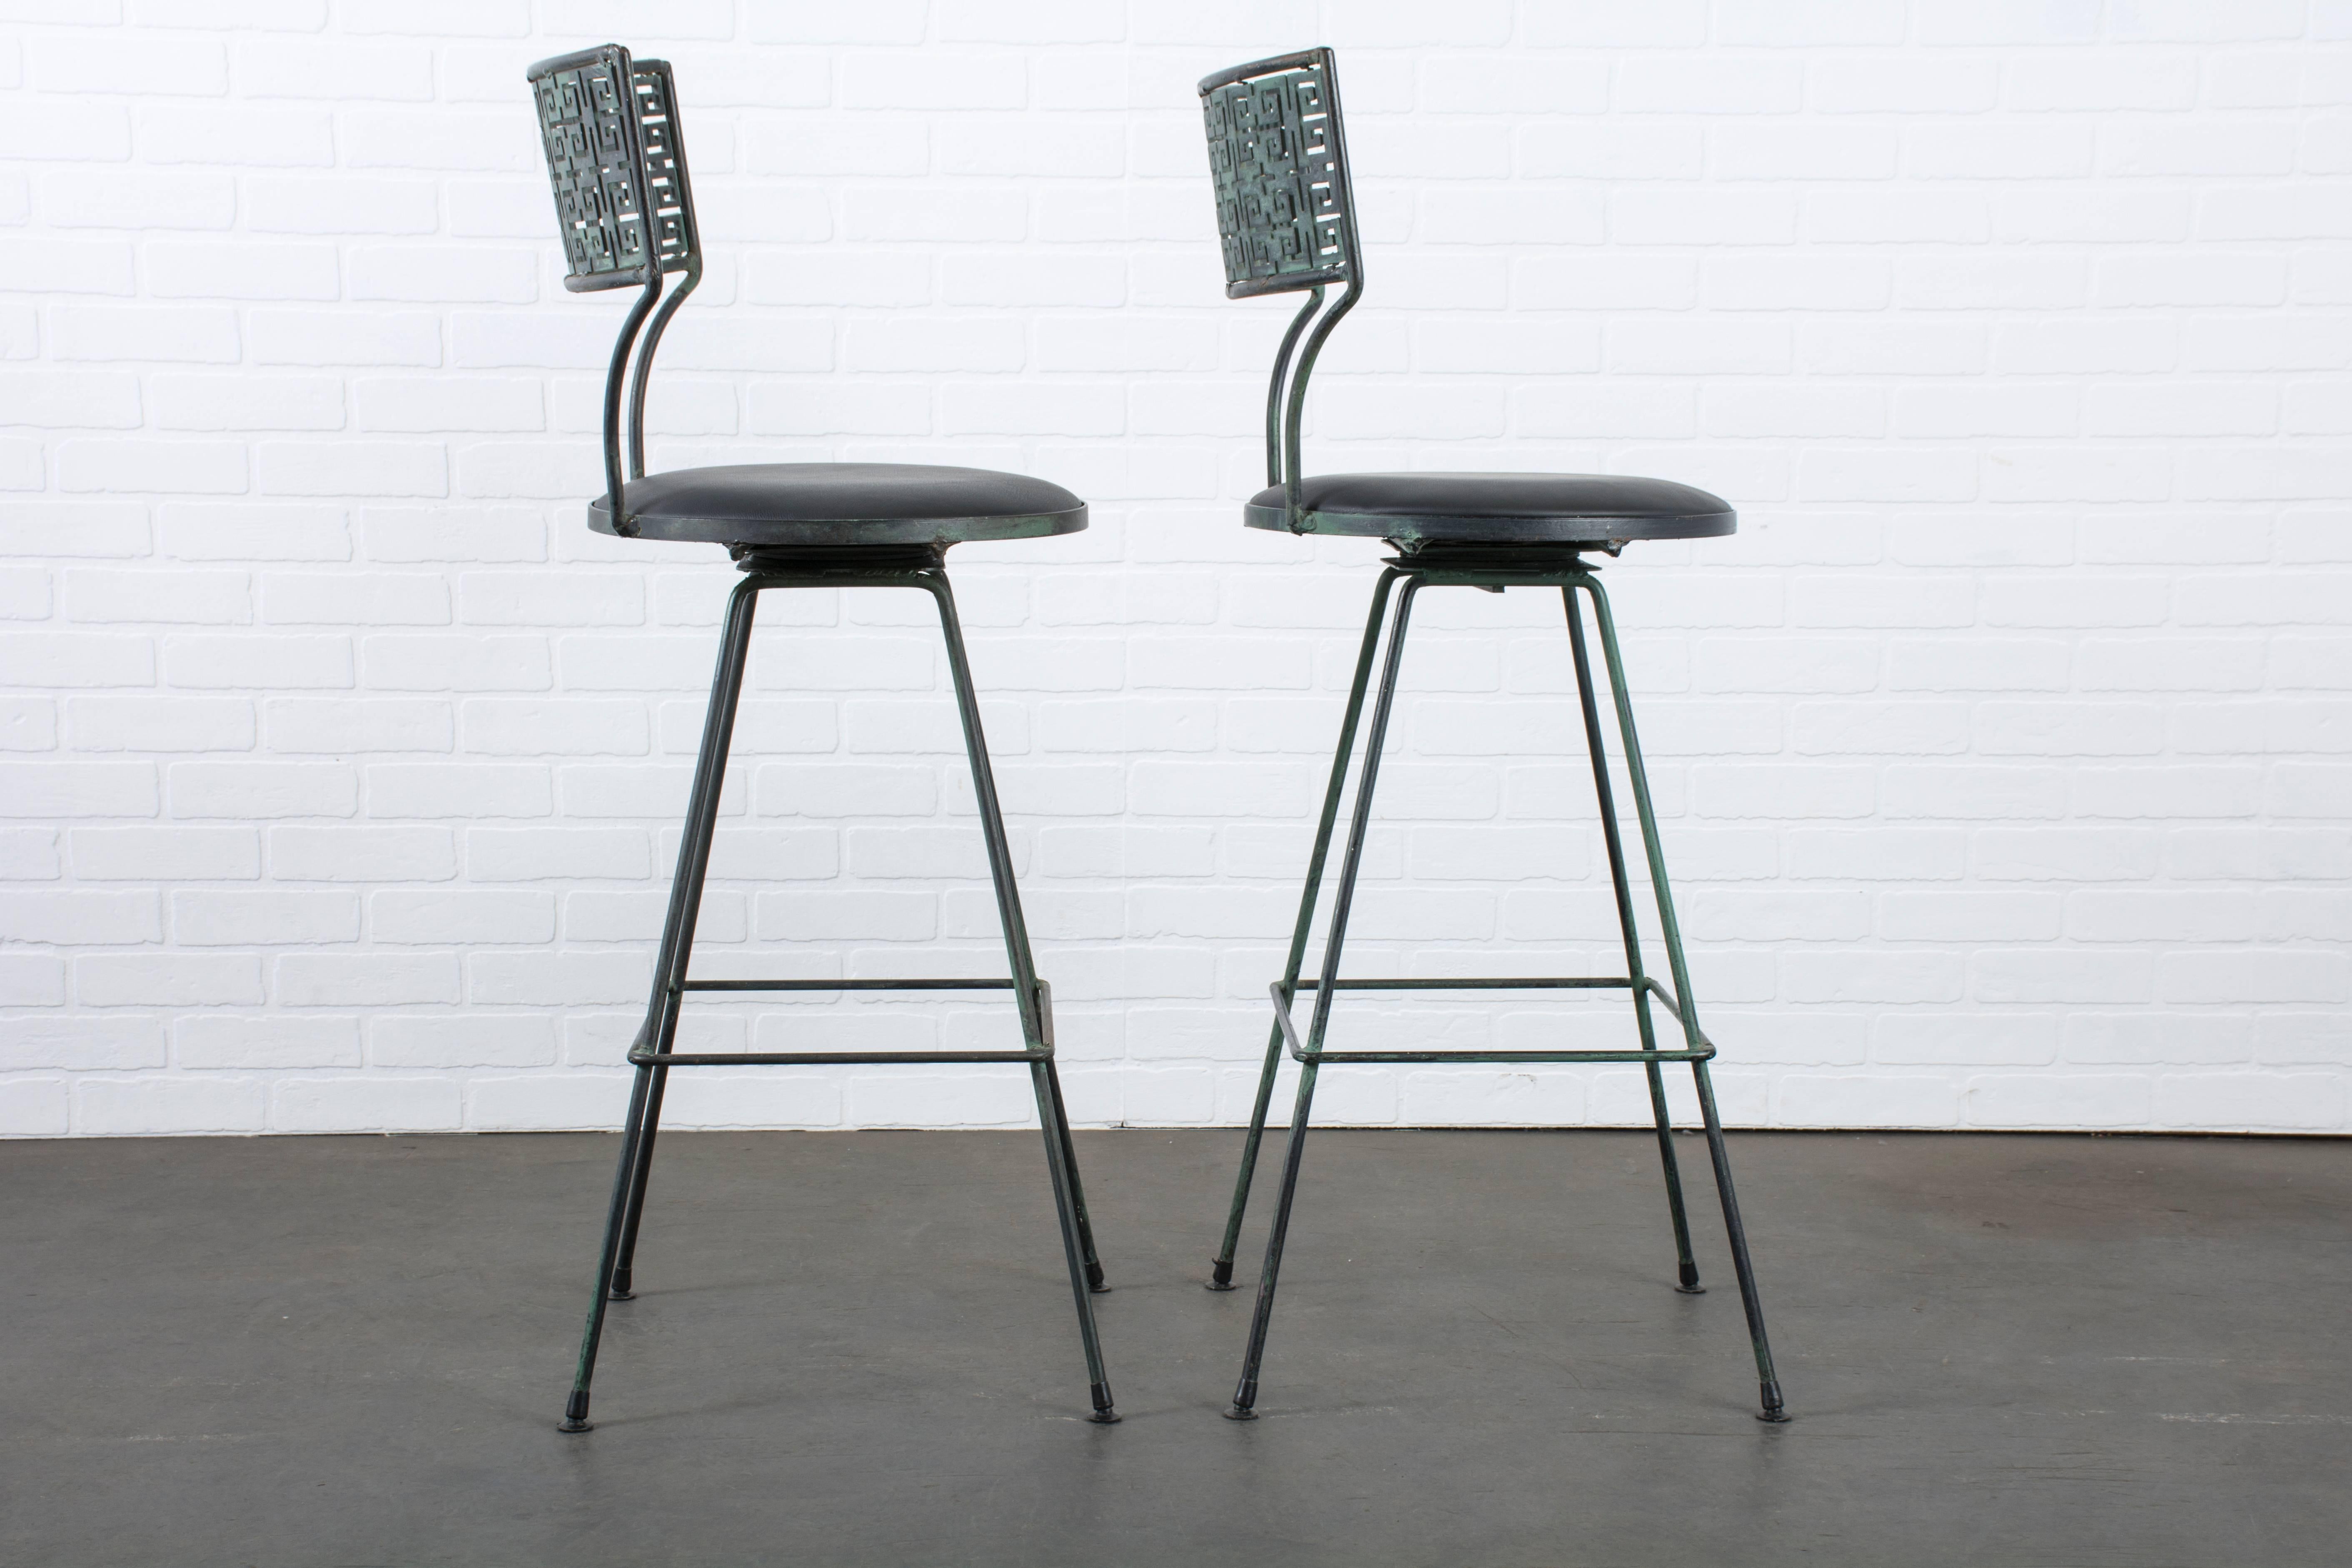 This is a pair of vintage Mid-Century swivel bar stools. The frames are black wrought iron with a green patina and the seats have been professionally reupholstered in black leather.